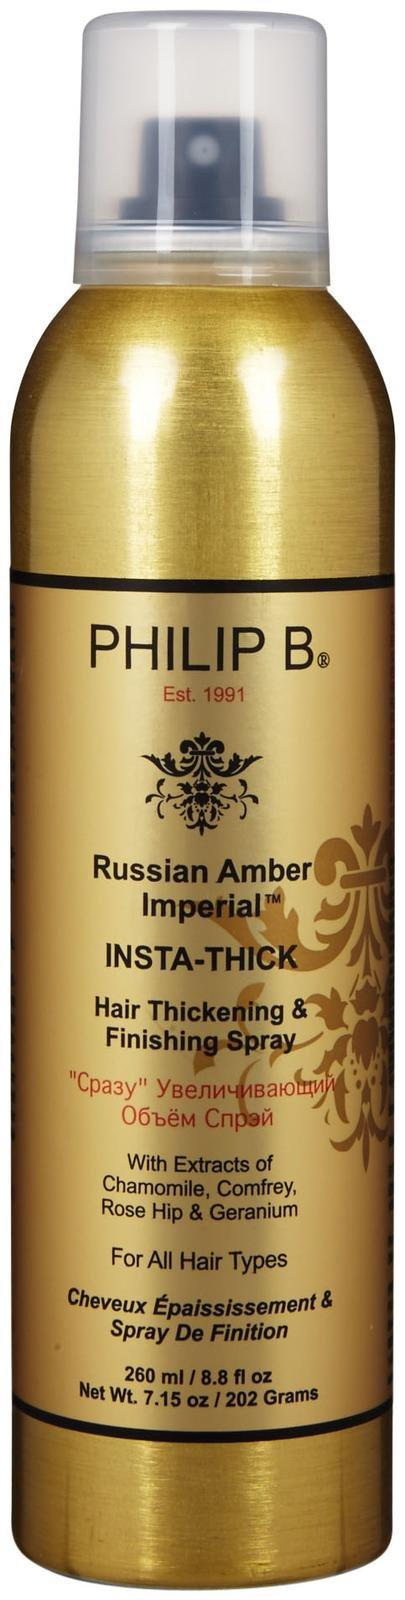 Philip B. Russian Amber Imperial Insta-thick